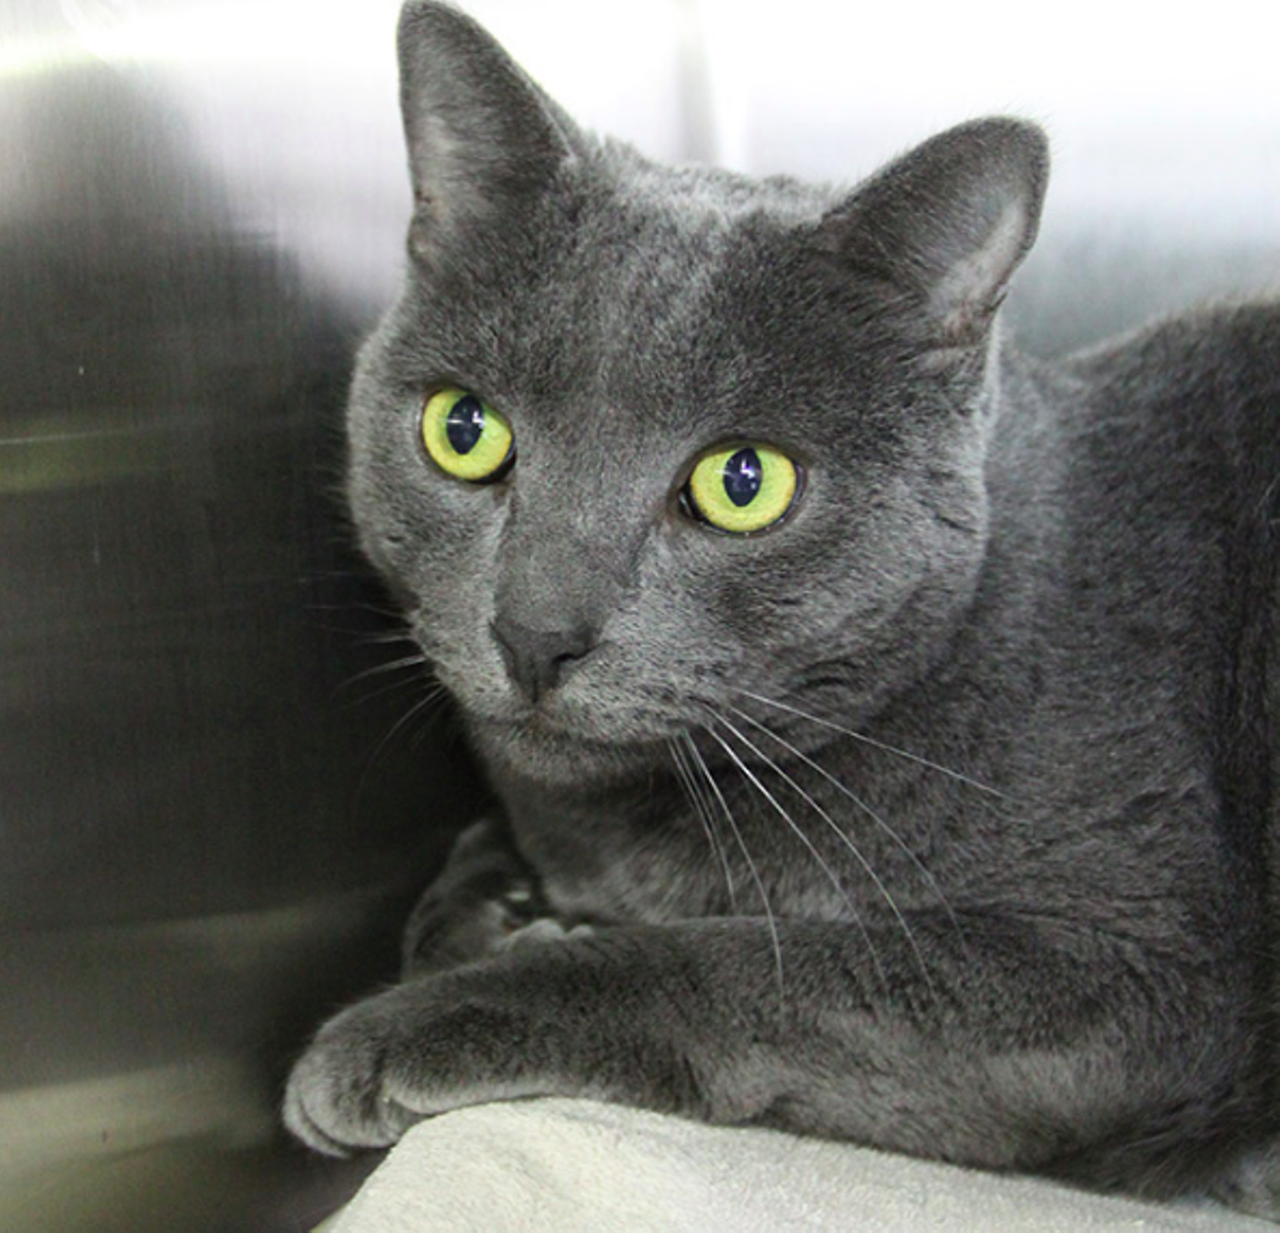 Billiam
"I’m one of the best hunks you will ever meet. I’m very friendly and affectionate. I love getting attention and don’t mind being cuddled. I would love to go to your home to show you how incredible I really am. Please adopt me today!"